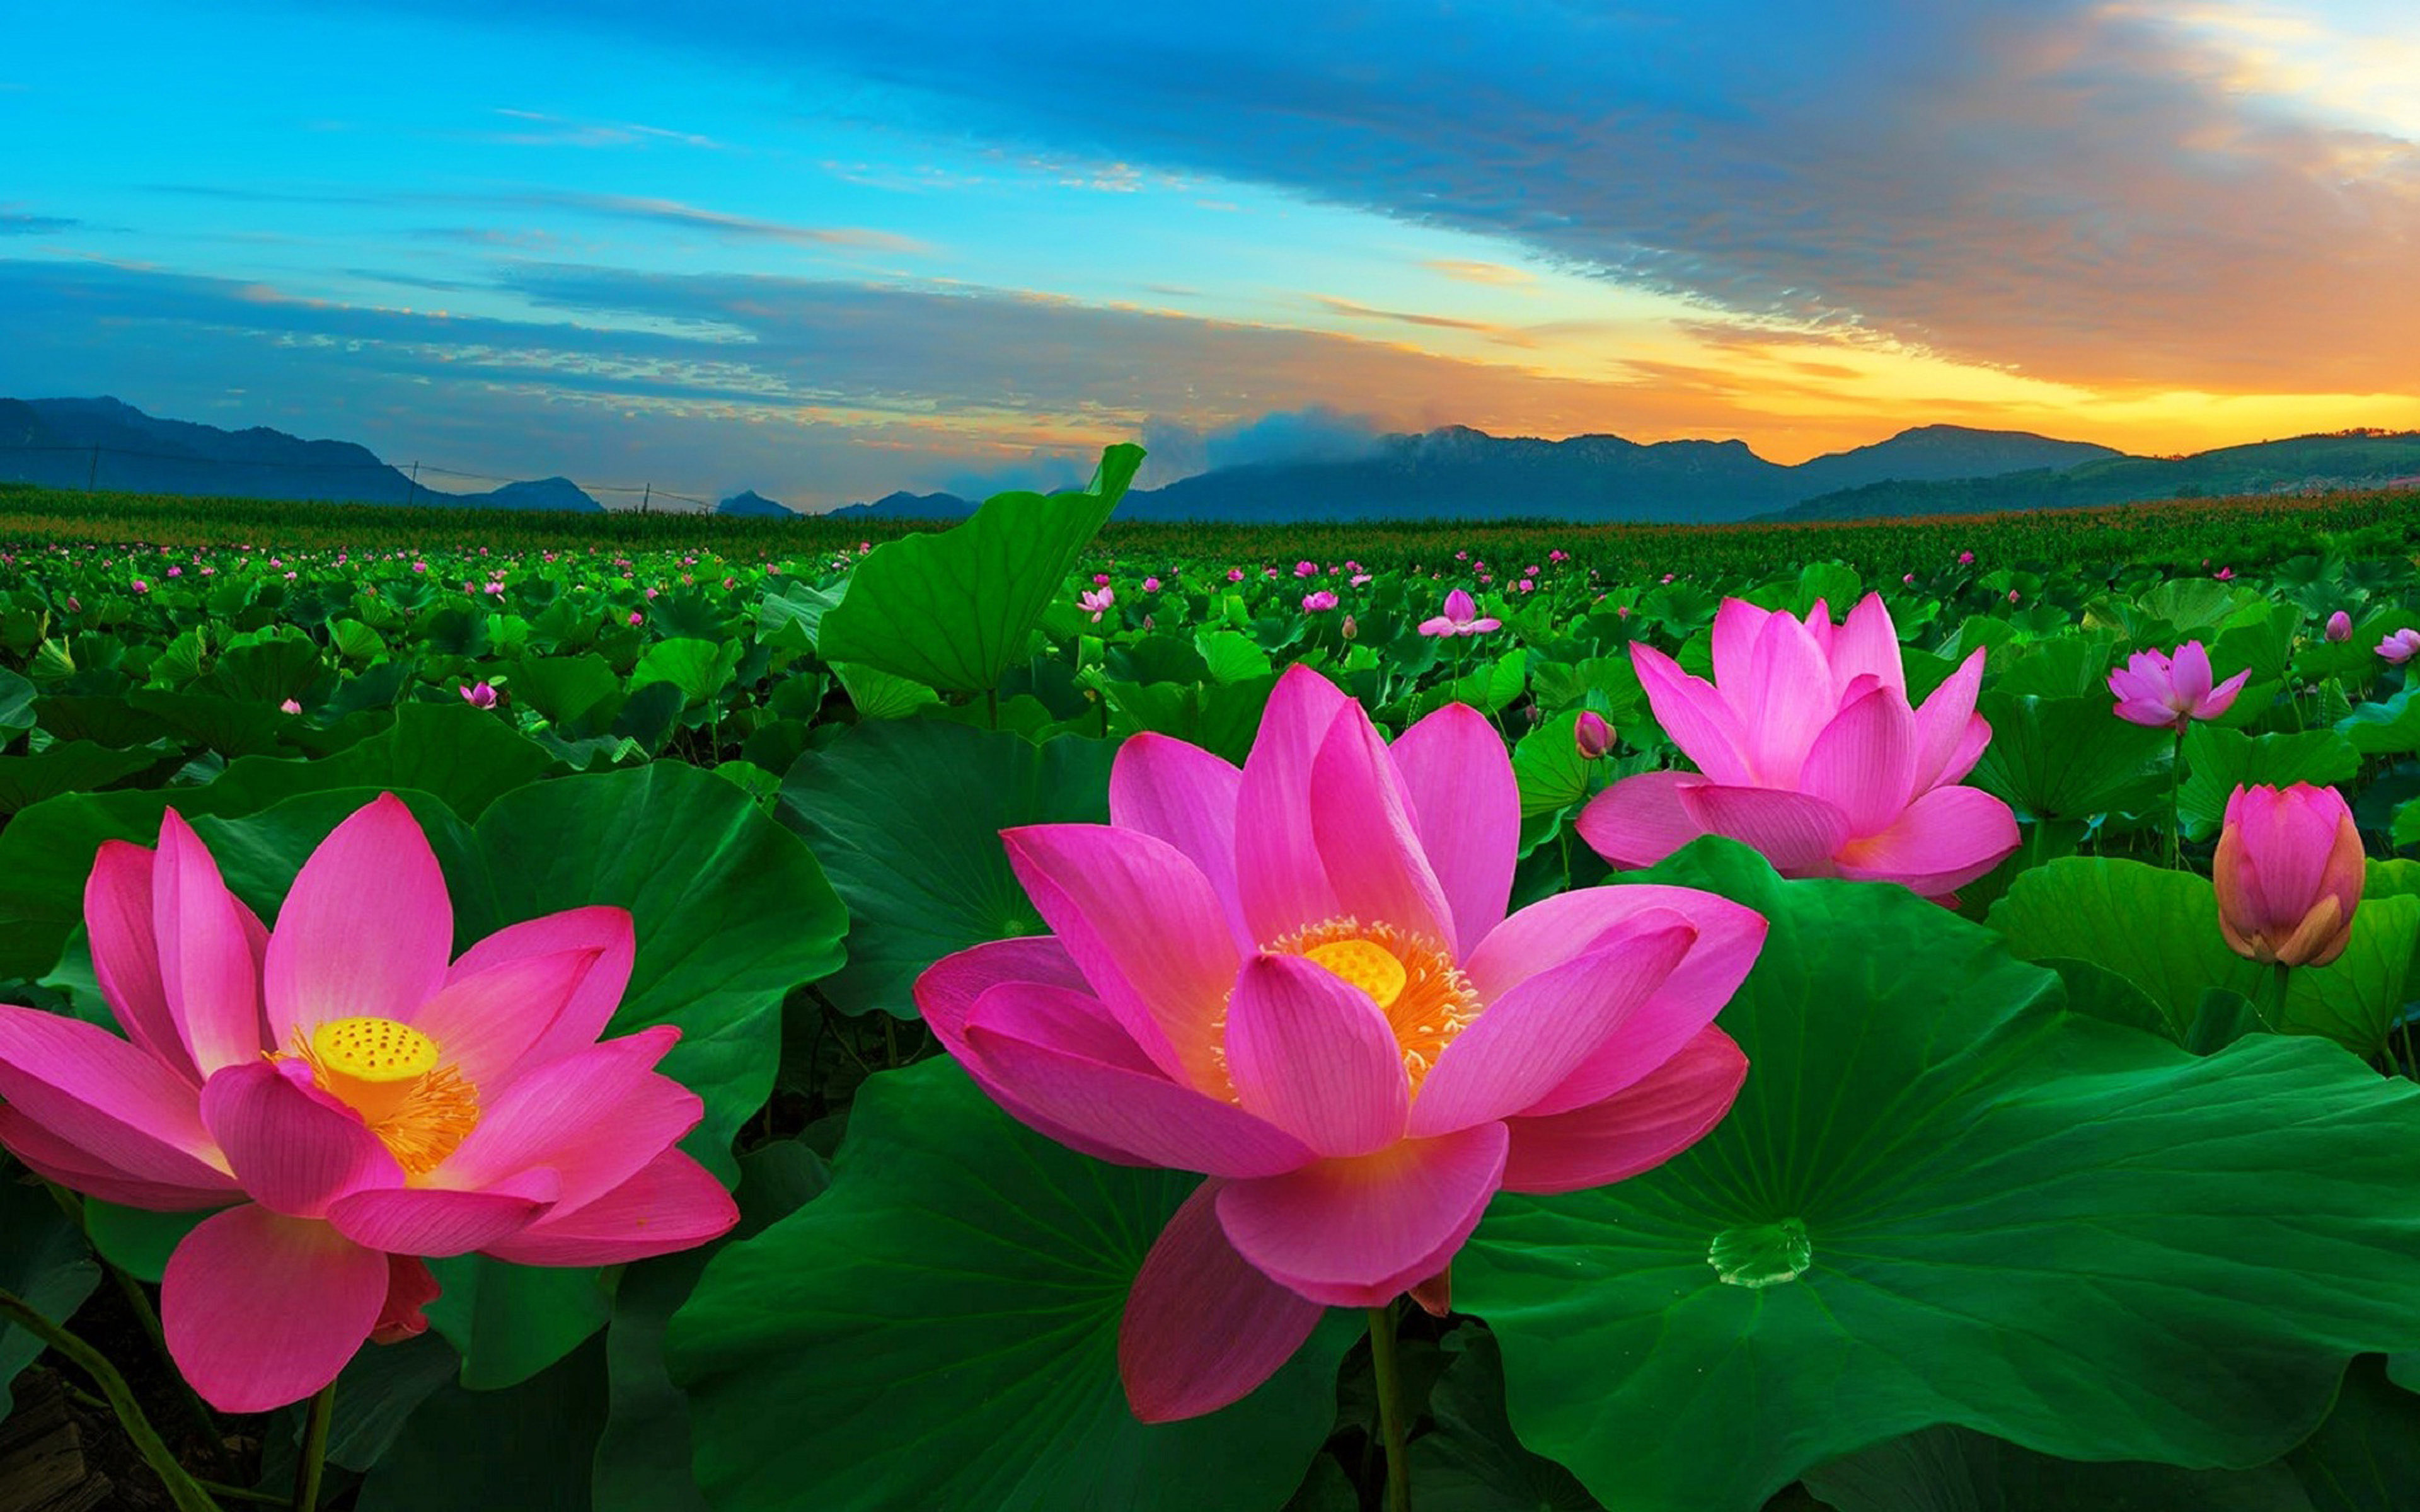 Flower Pictures Pink Flowers And Green Leaves Traditional Flowers In China  Lotus Wallpaper Hd For Desktop Tablets And Mobile Phones : 